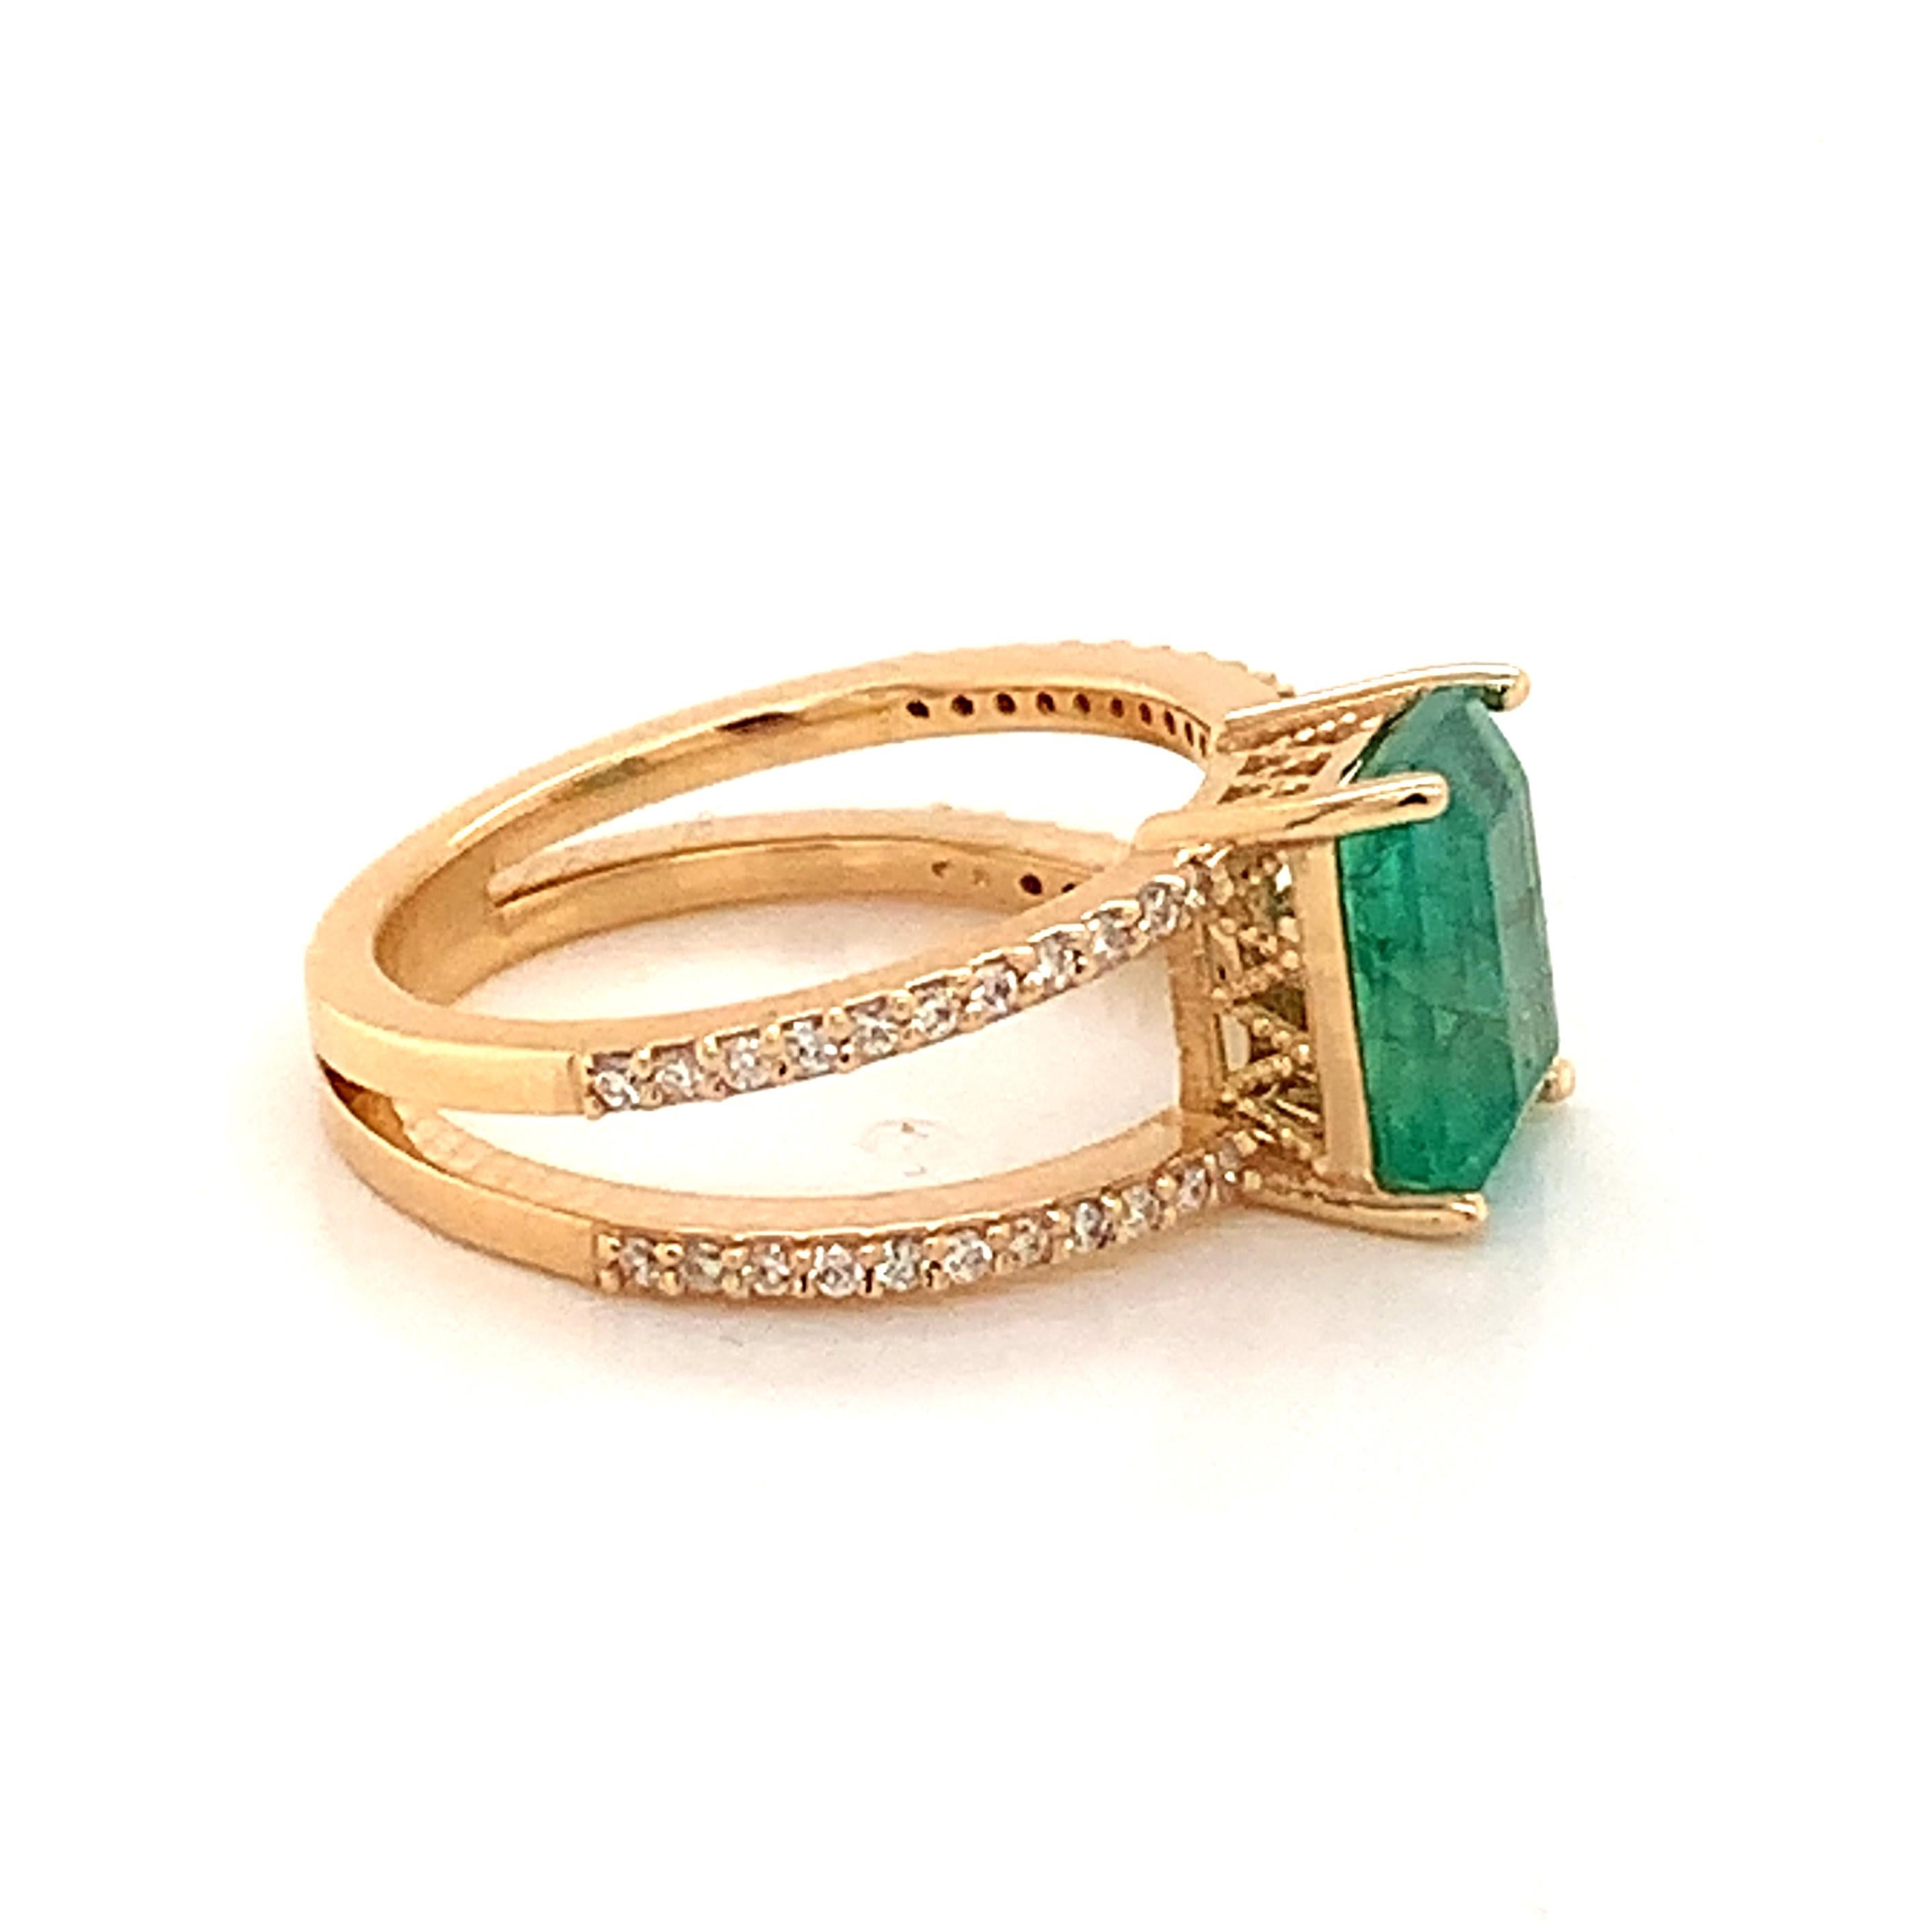 Natural Emerald Diamond Ring 14k Gold 2.32 TCW Certified For Sale 2